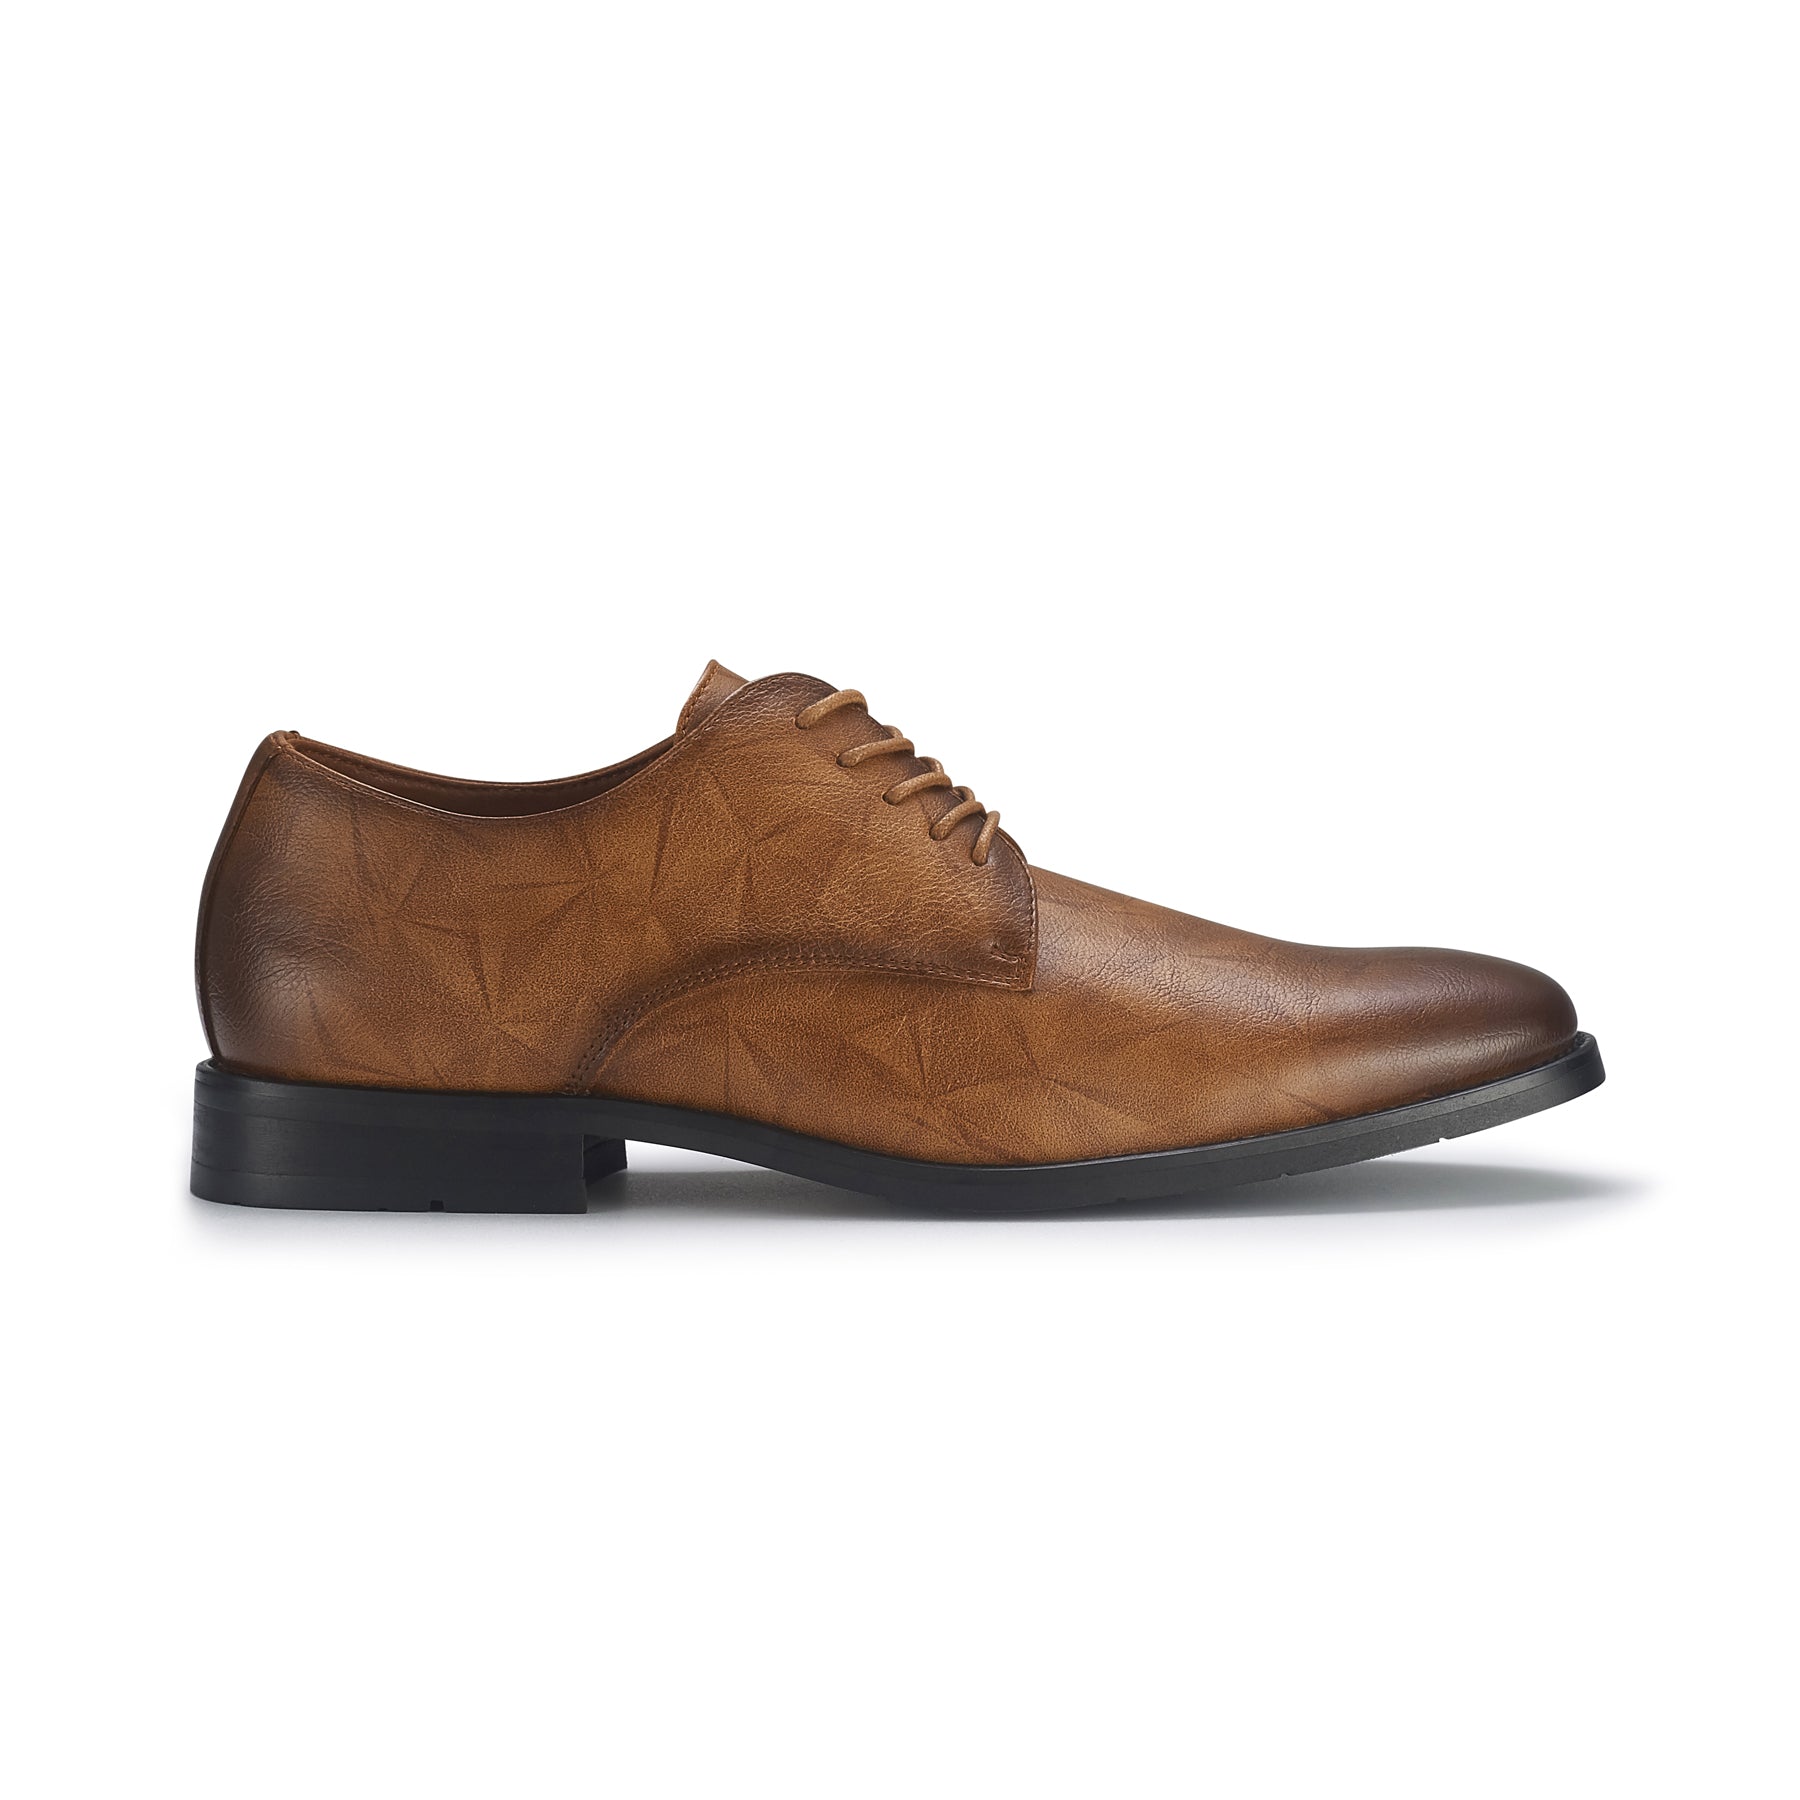 Geometric Pattern Derby Shoes | Caleb by Ferro Aldo | Conal Footwear | Outer Side Angle View